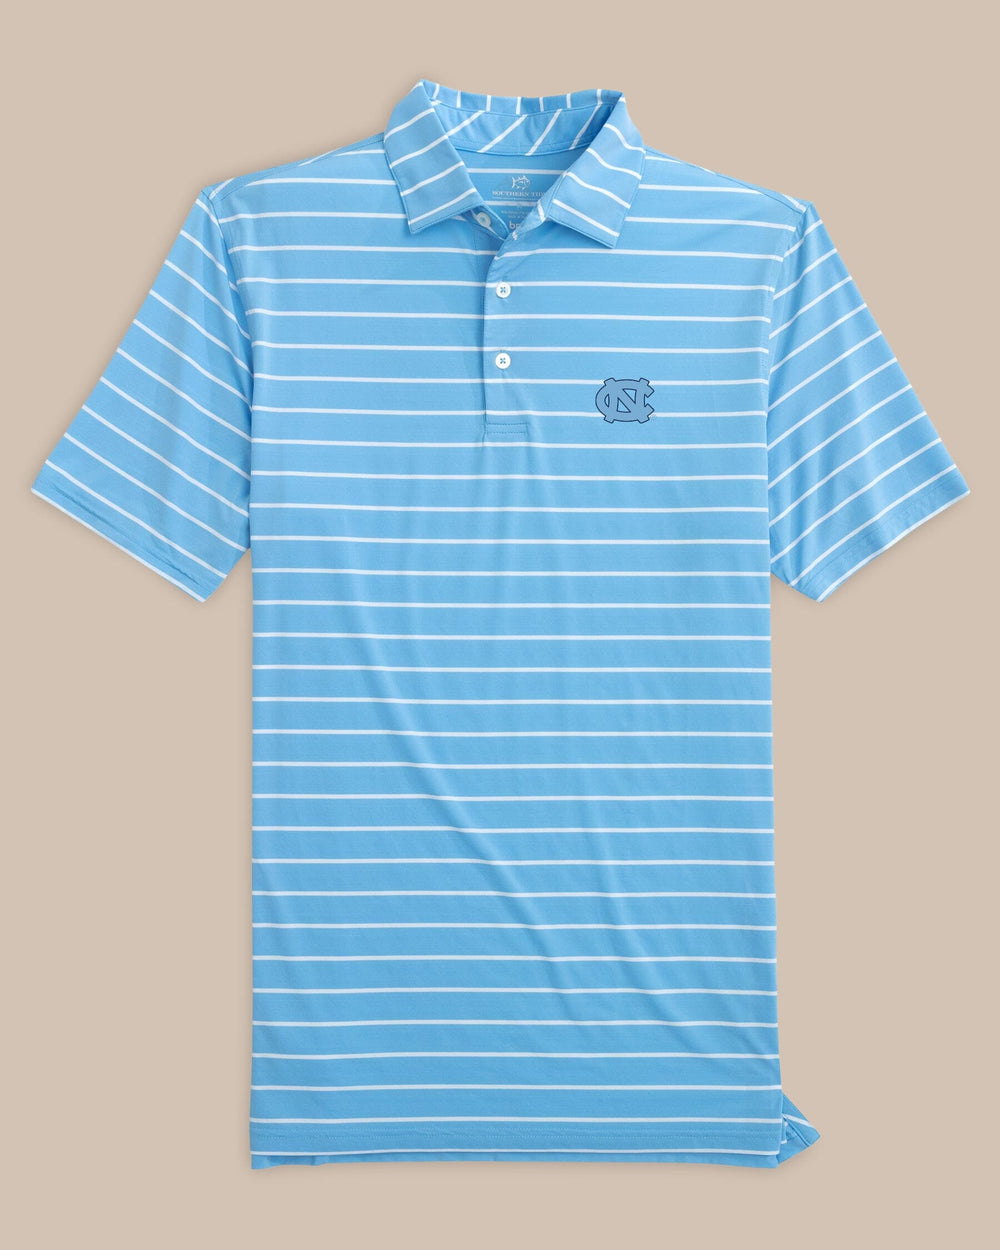 The front view of the UNC Tar Heels Brreeze Desmond Stripe Performance Polo by Southern Tide - Rush Blue